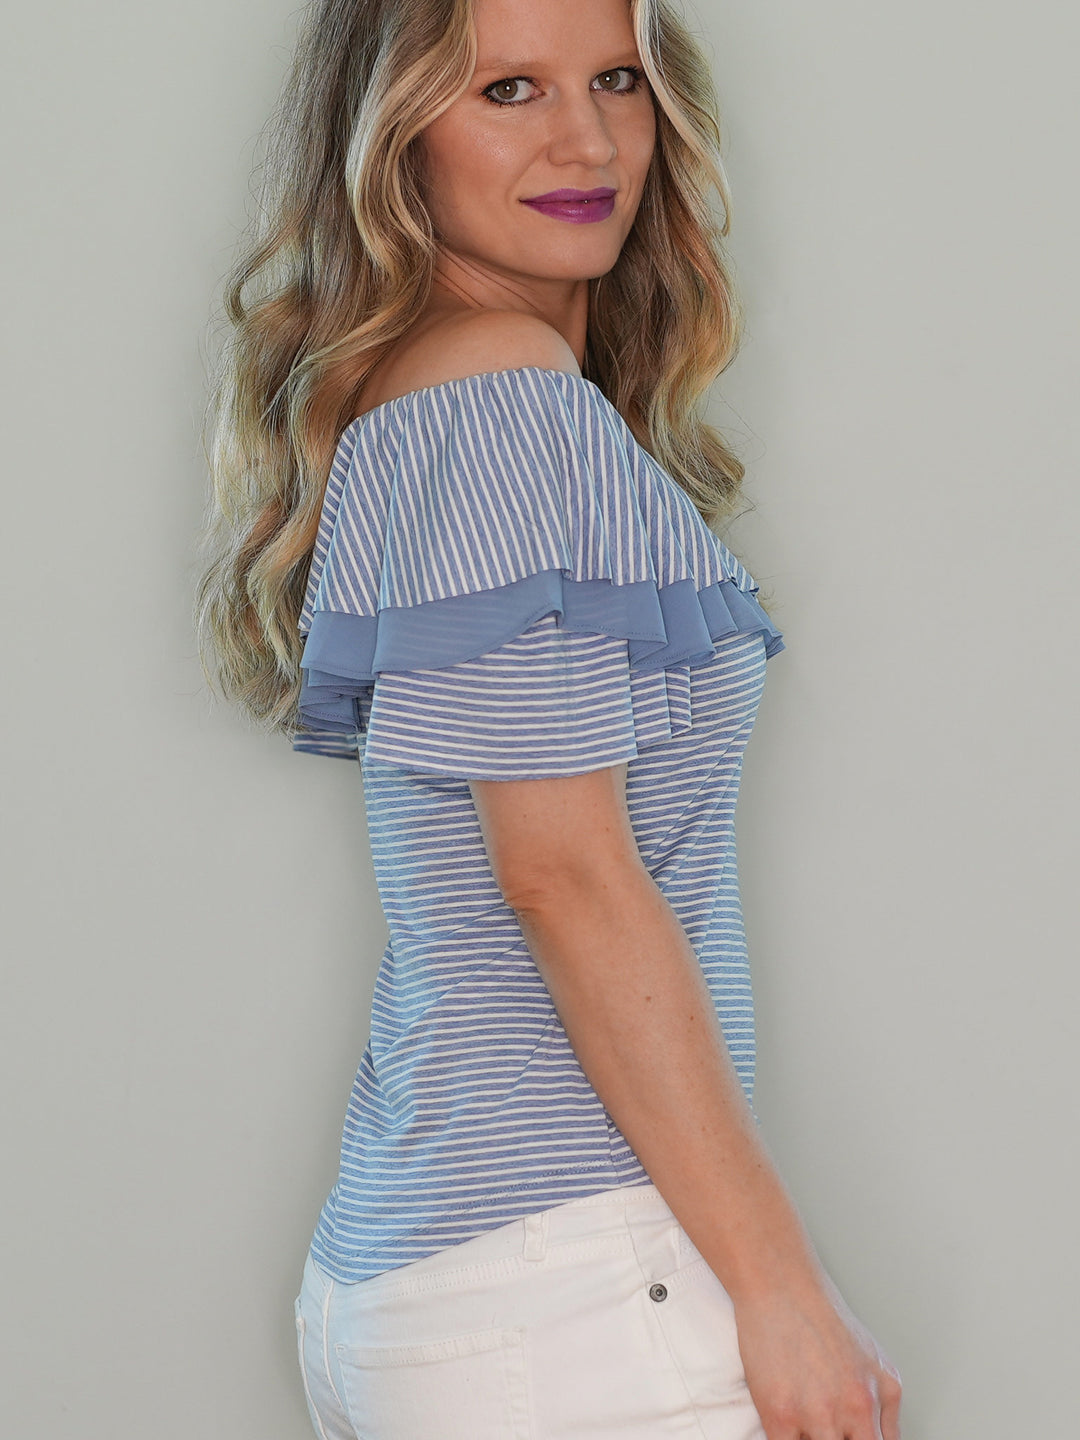 Blue and white striped off the shoulder top with ruffle